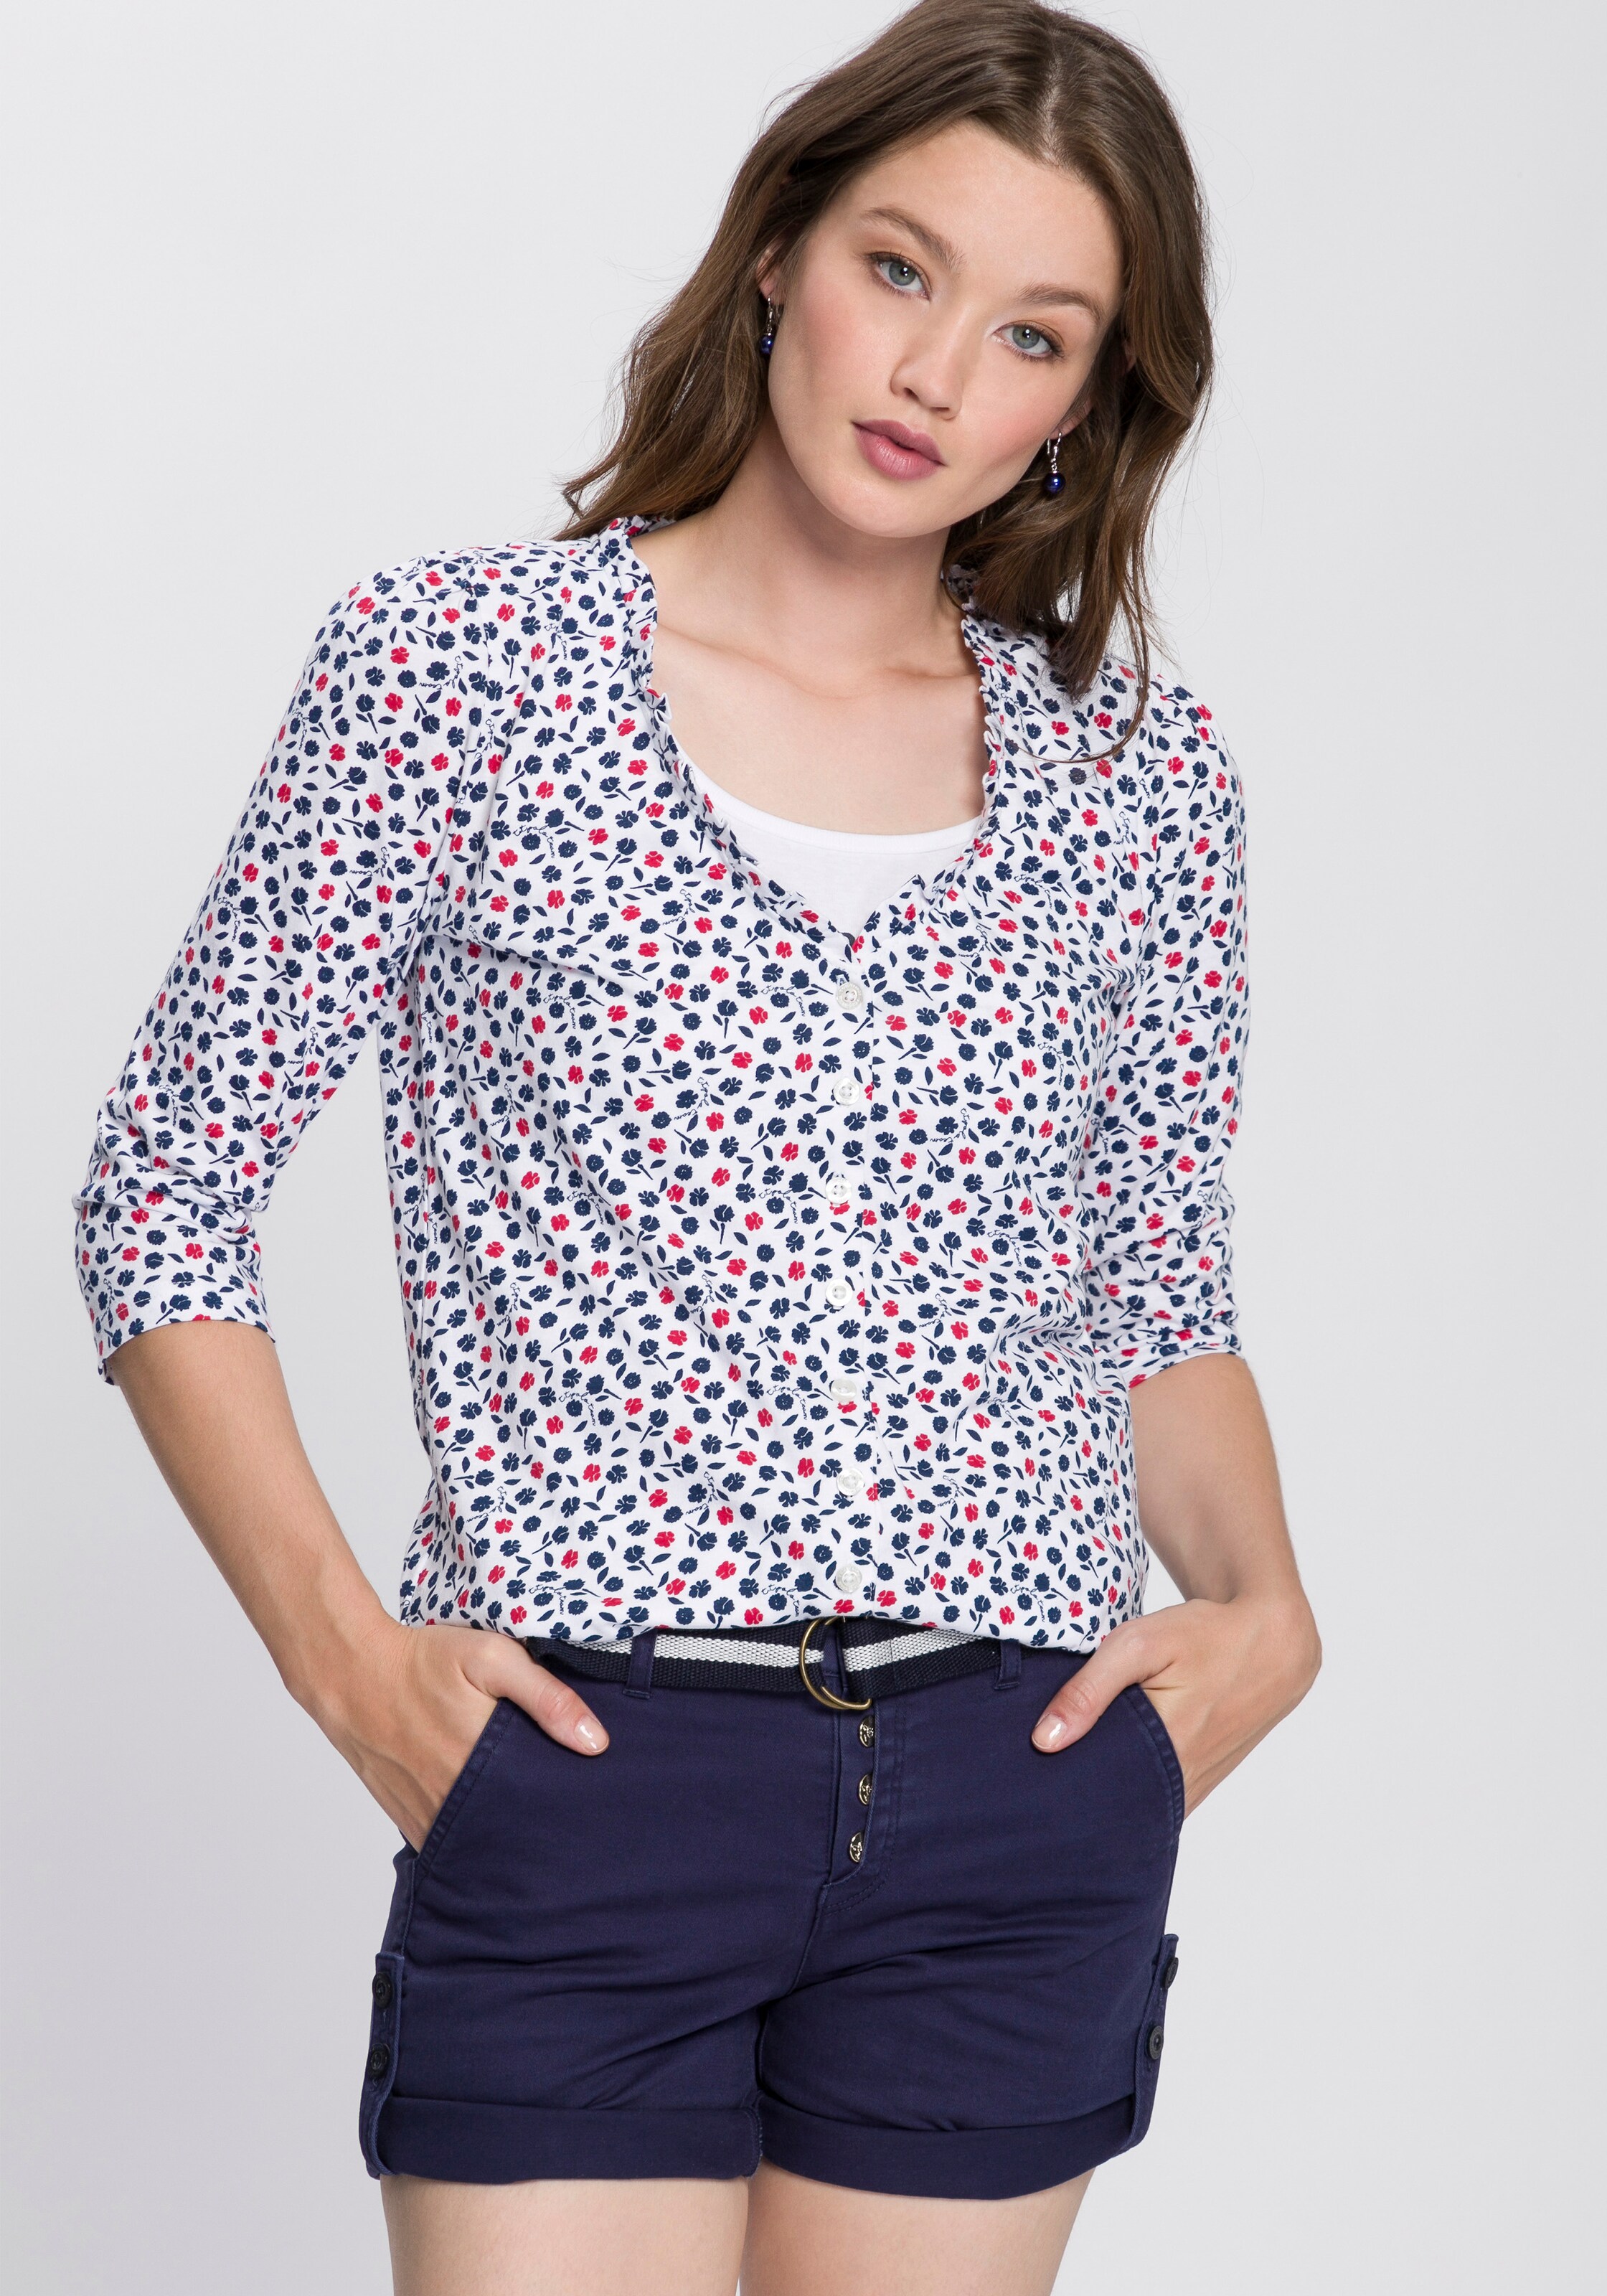 Frauen Shirts & Tops Tom Tailor Polo Team Bluse + Top in Weiß - CN15475